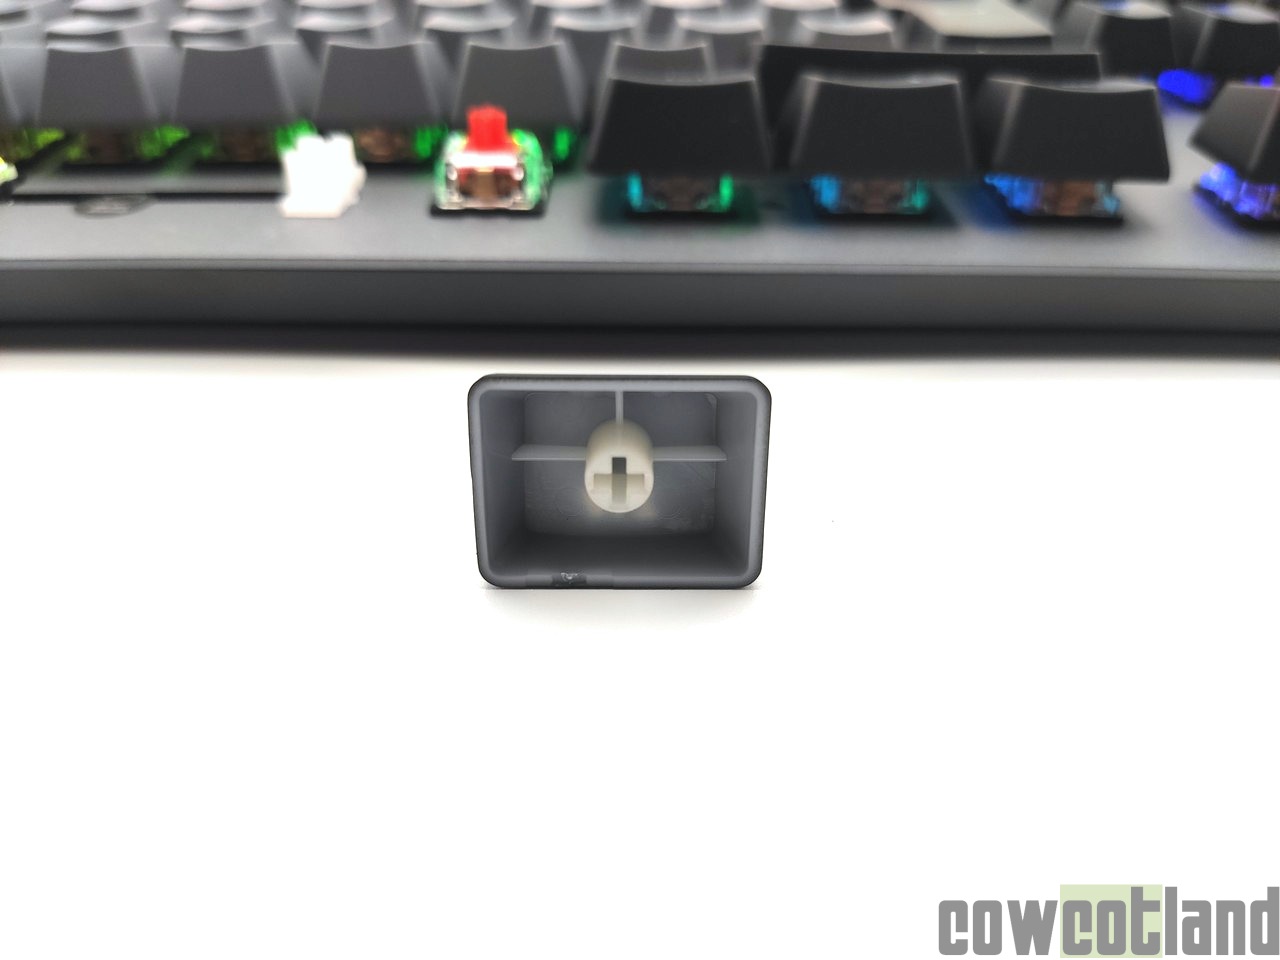 Image 46790, galerie Test clavier Cooler Master CK352 : un clavier plug-and-play  switchs optiques